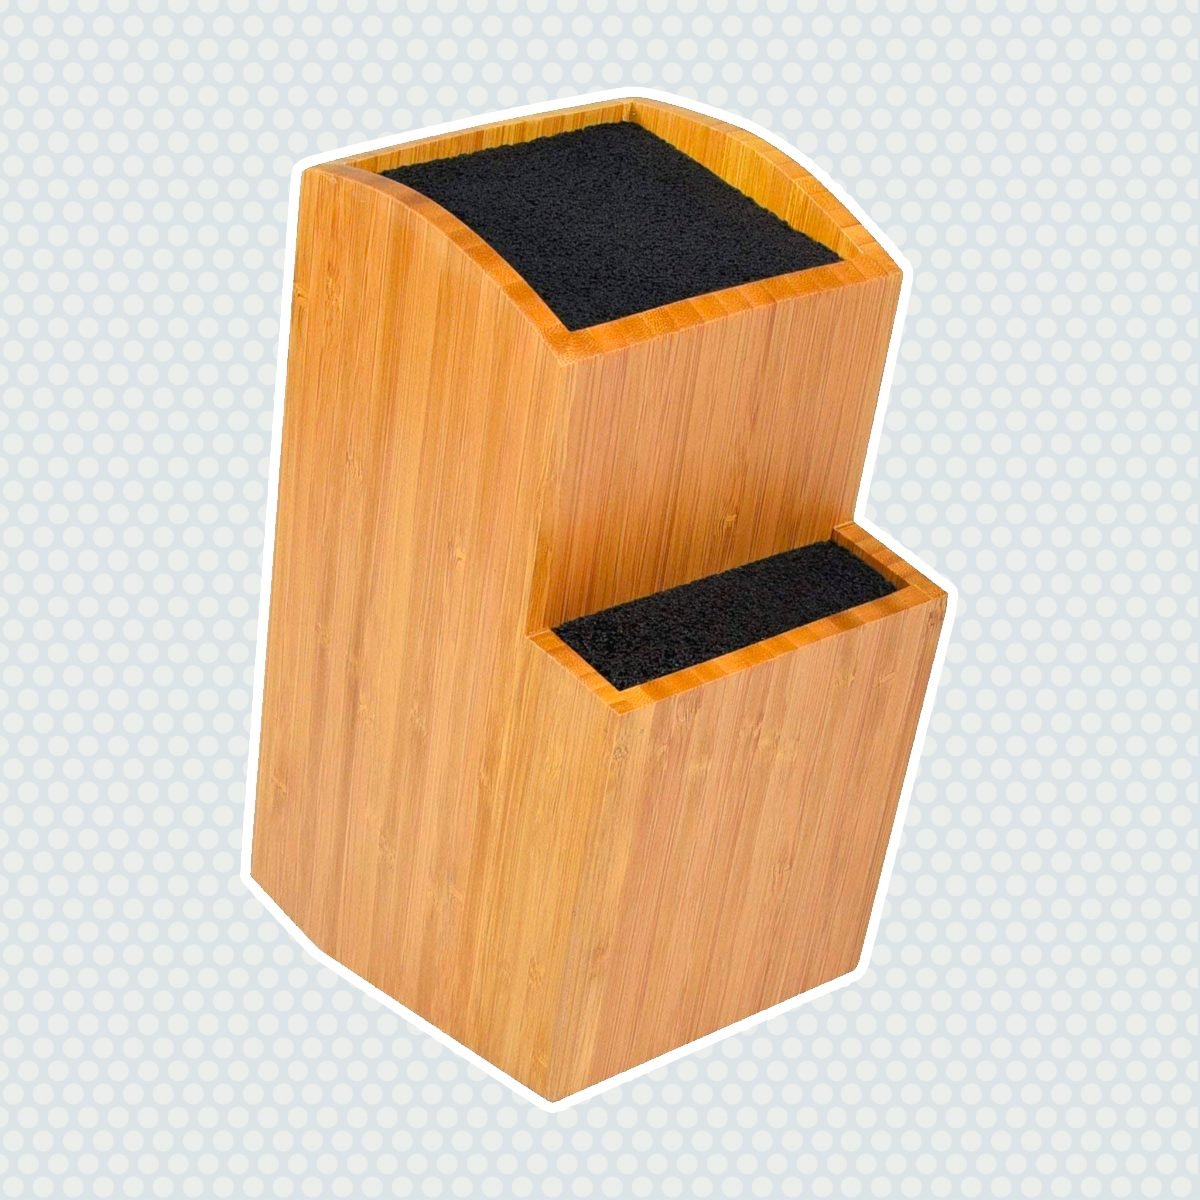 https://www.tasteofhome.com/wp-content/uploads/2019/05/Bamboo-Universal-Knife-Block-Two-tiered.jpg?fit=700%2C700